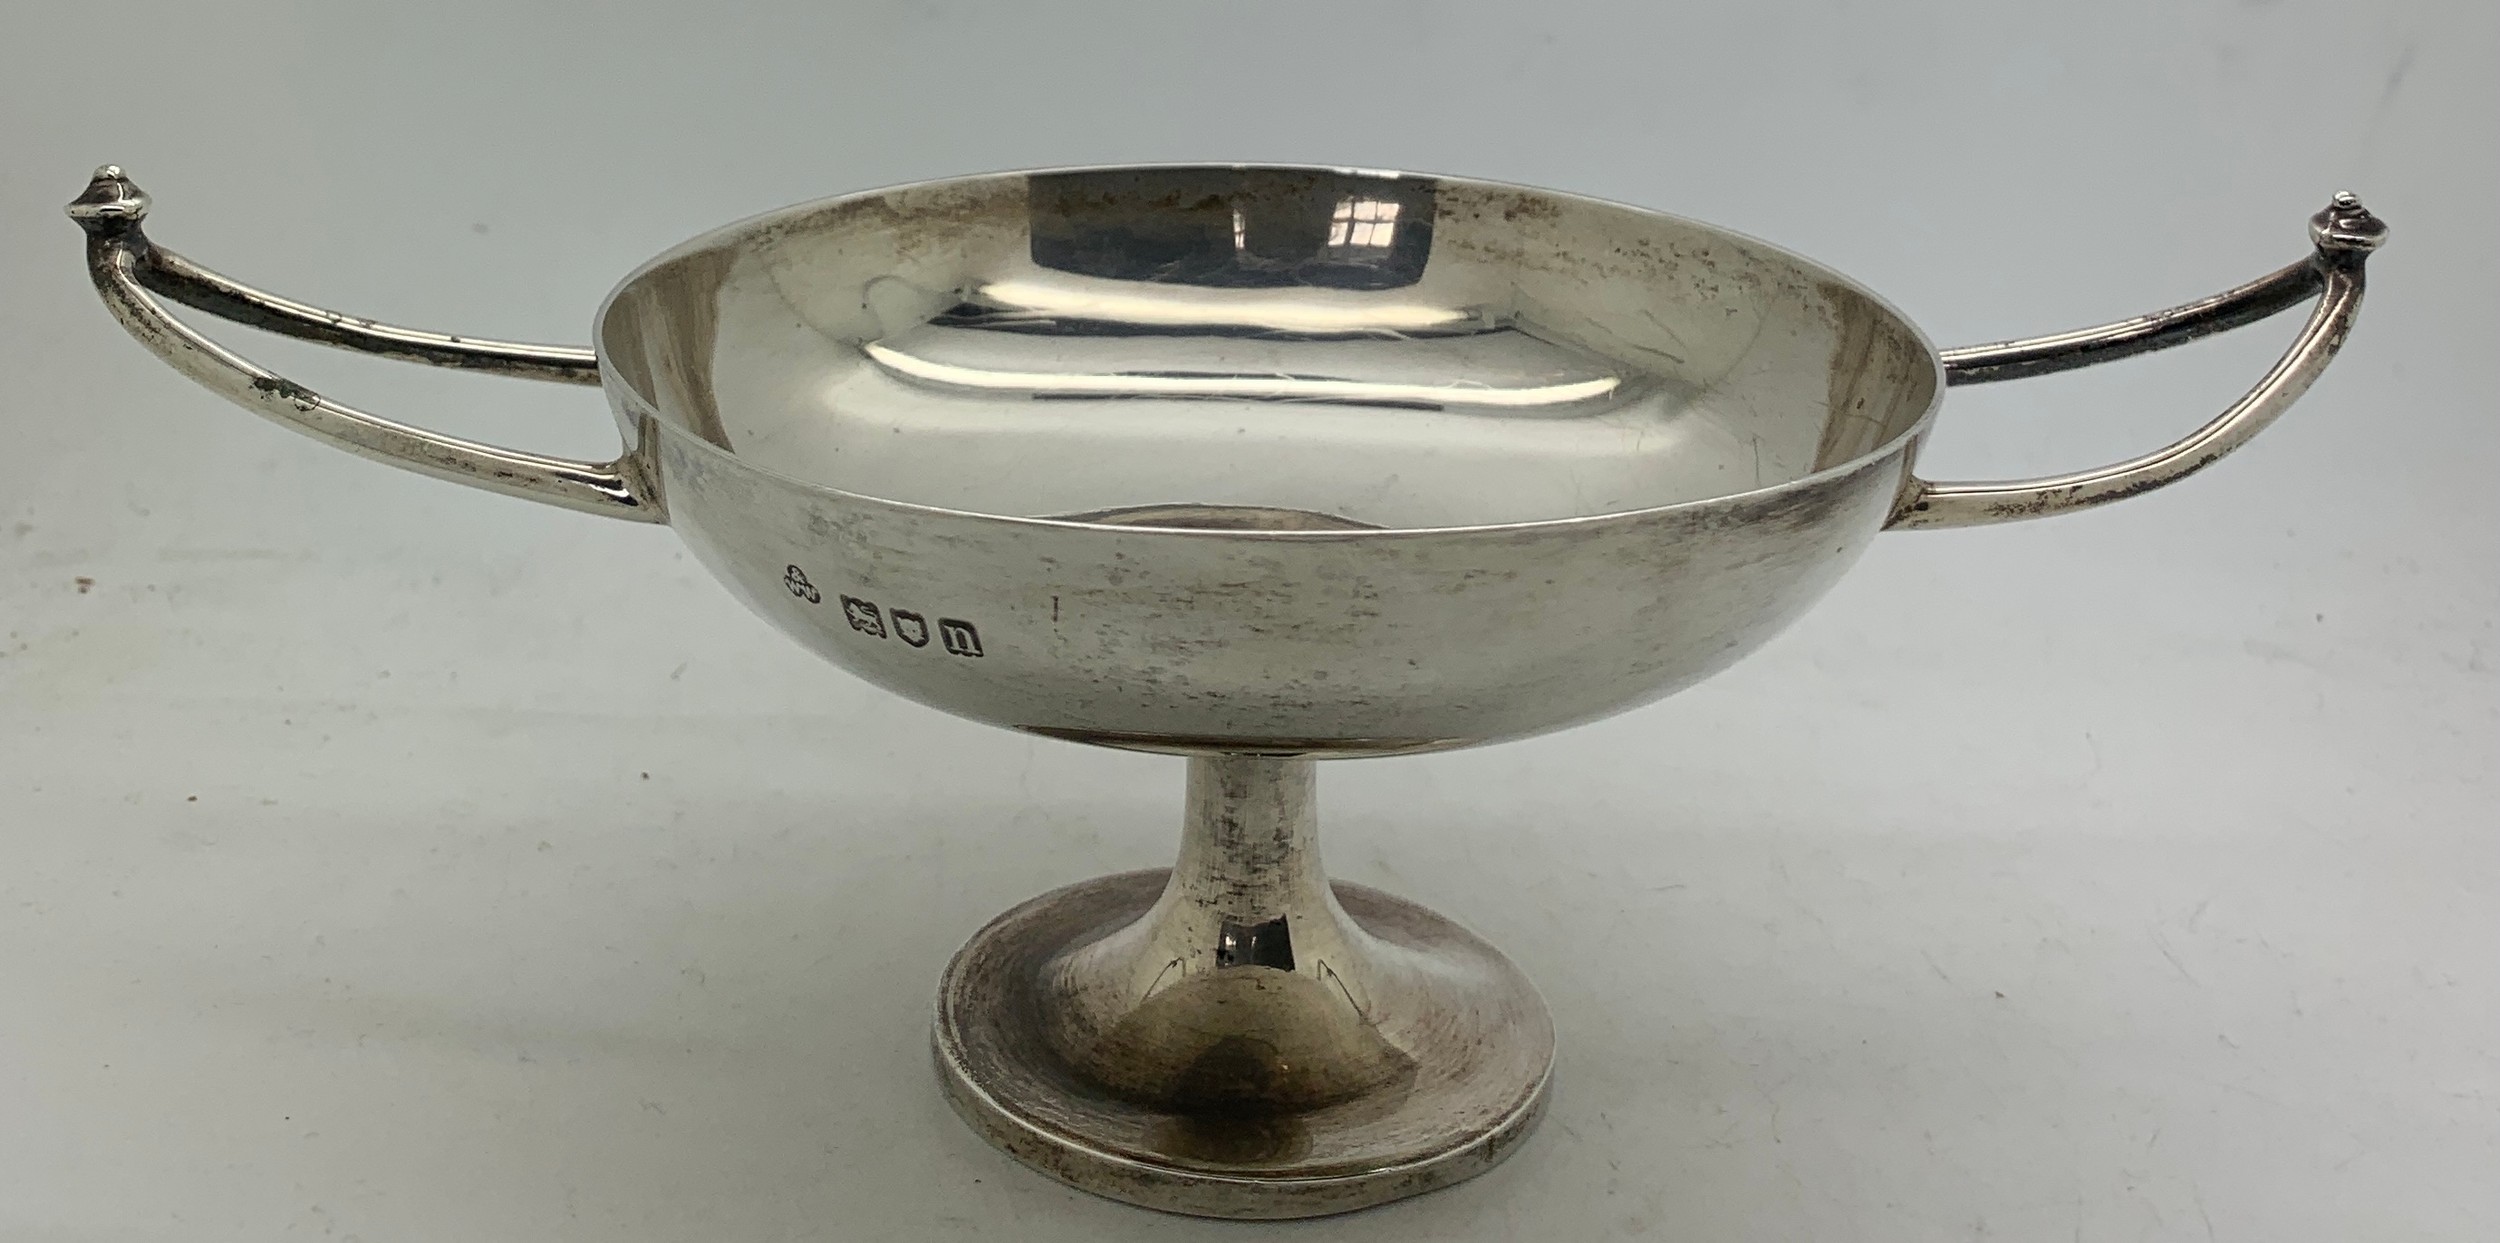 Twin handled silver dish 19cms x 11cms x cms h. London 1908, maker Wakely and Wheeler.Condition